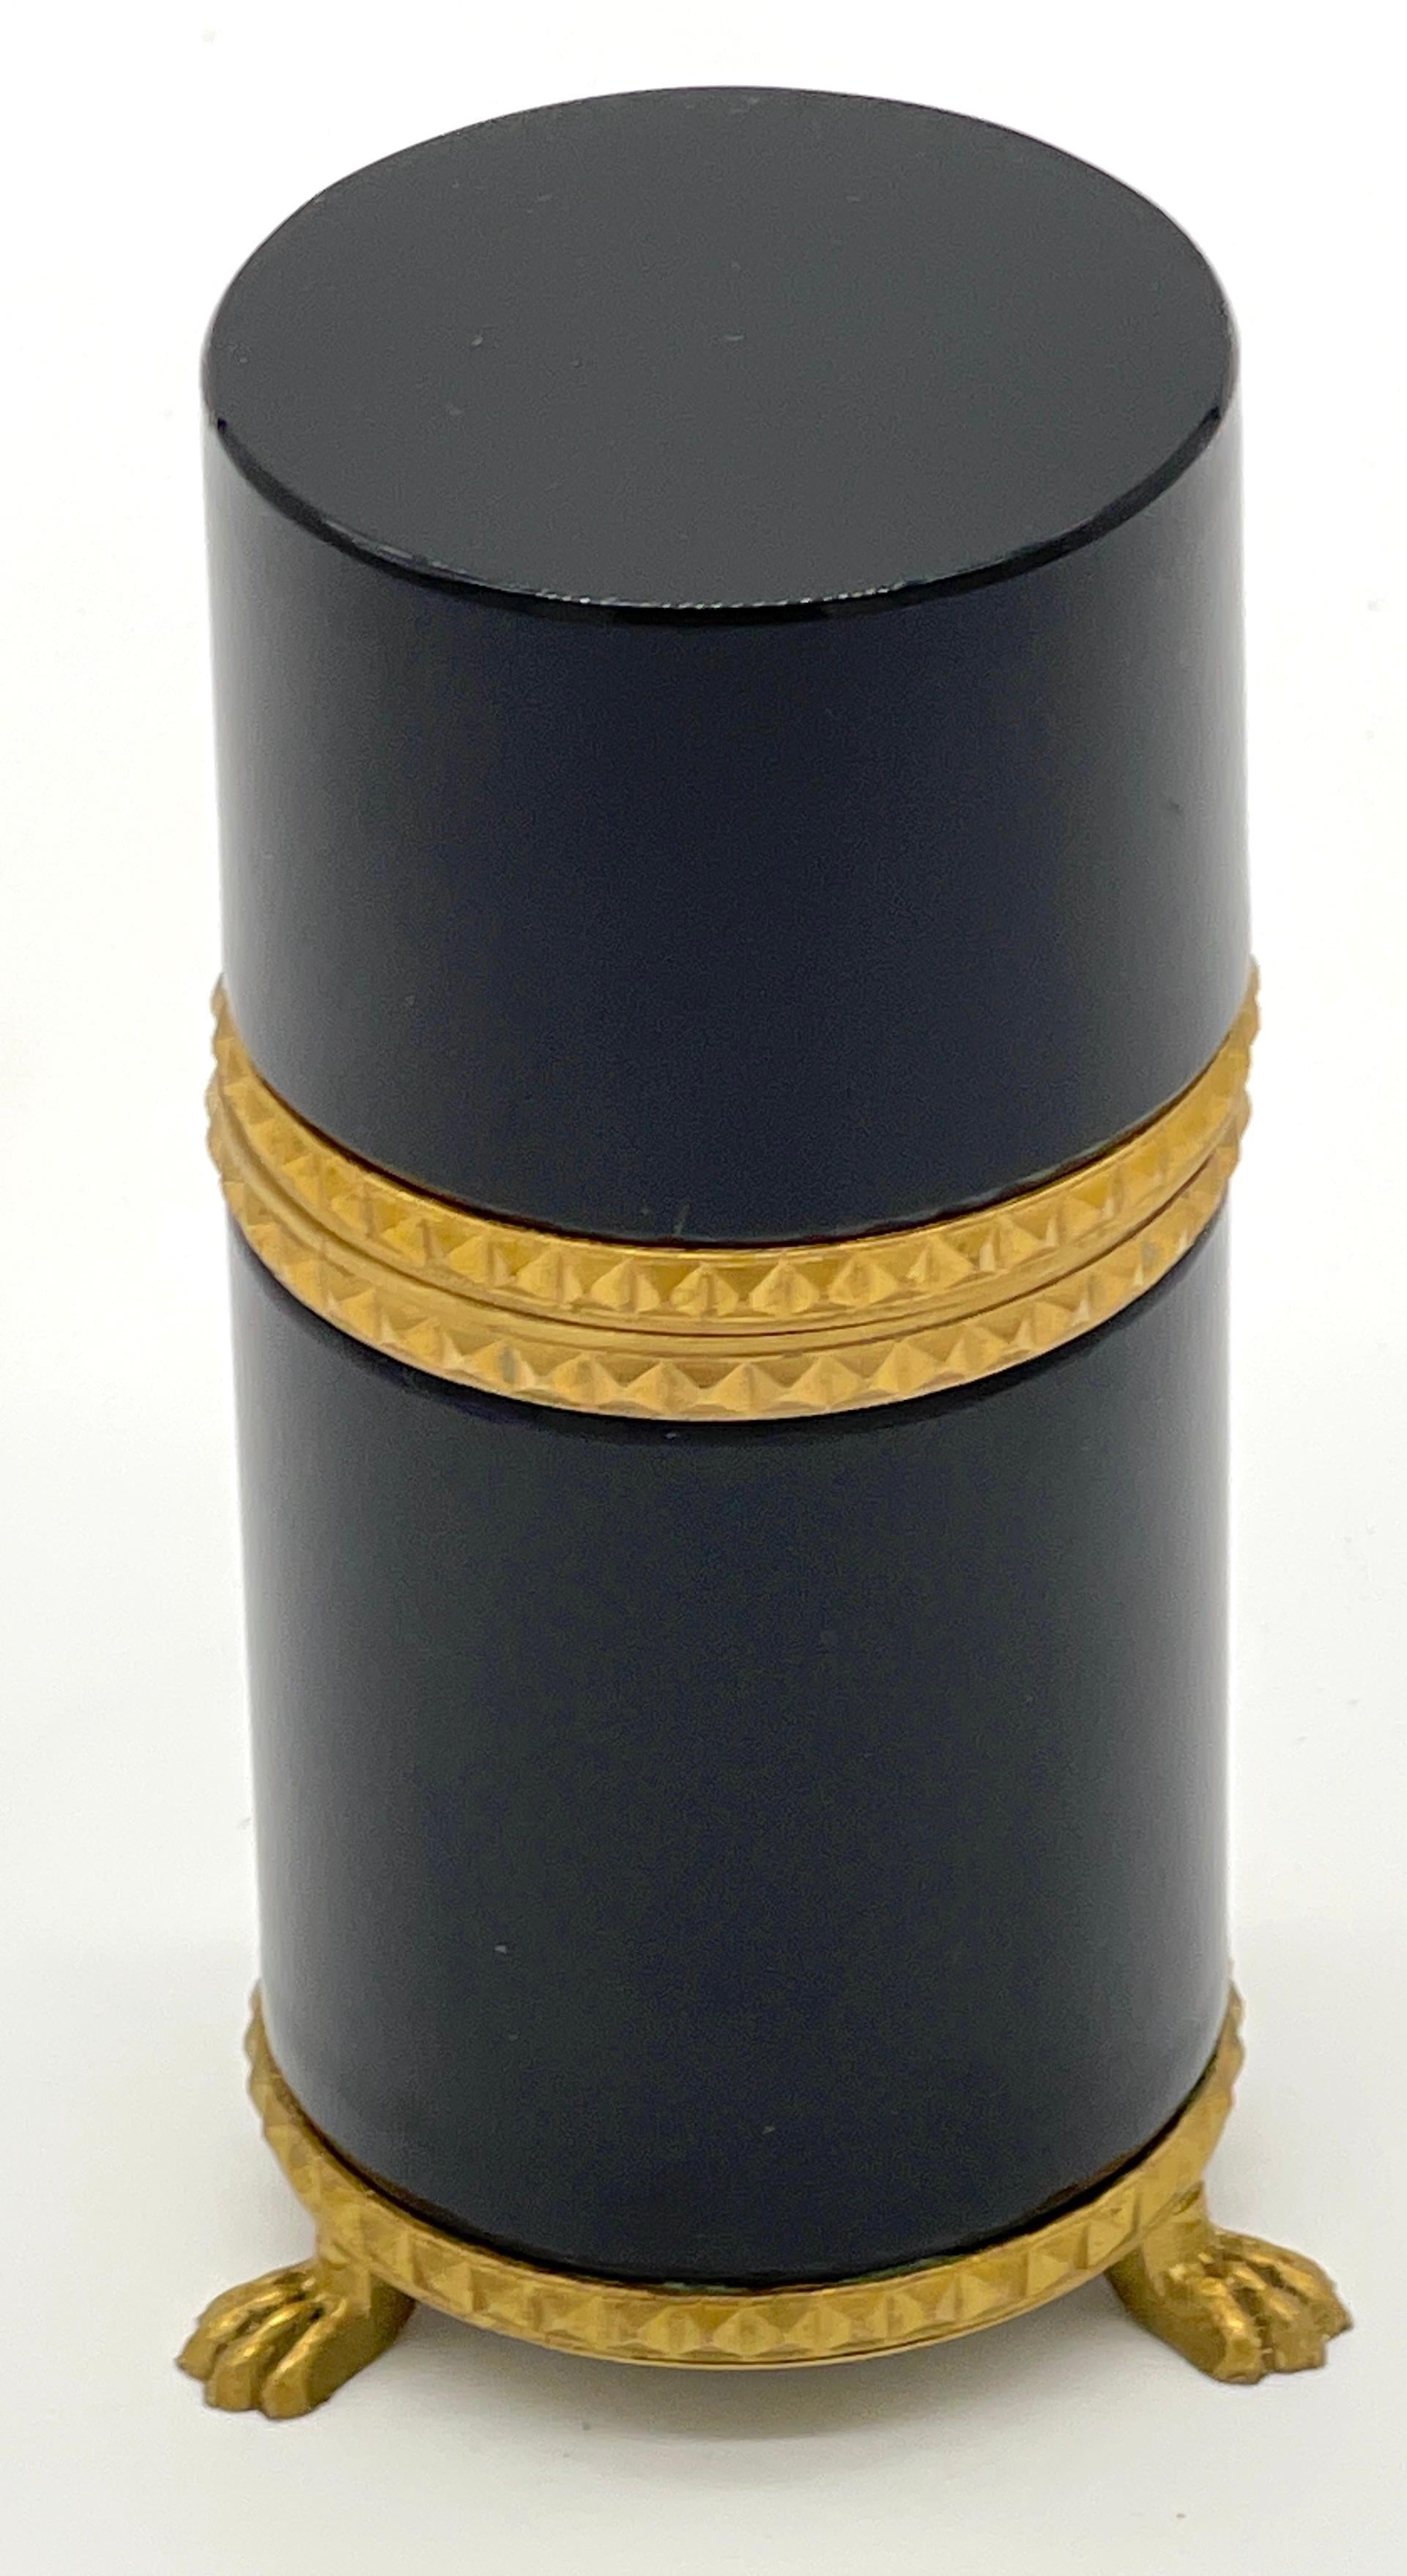 Italian Neoclassic Gilt Bronze Mounted  Black Murano Glass Tall Cylinder Box
Italy, 1960s

A sleek and unique piece from the 1960s, this Italian Neoclassic tall cylinder box is a stunning example of craftsmanship and design. The box is executed in